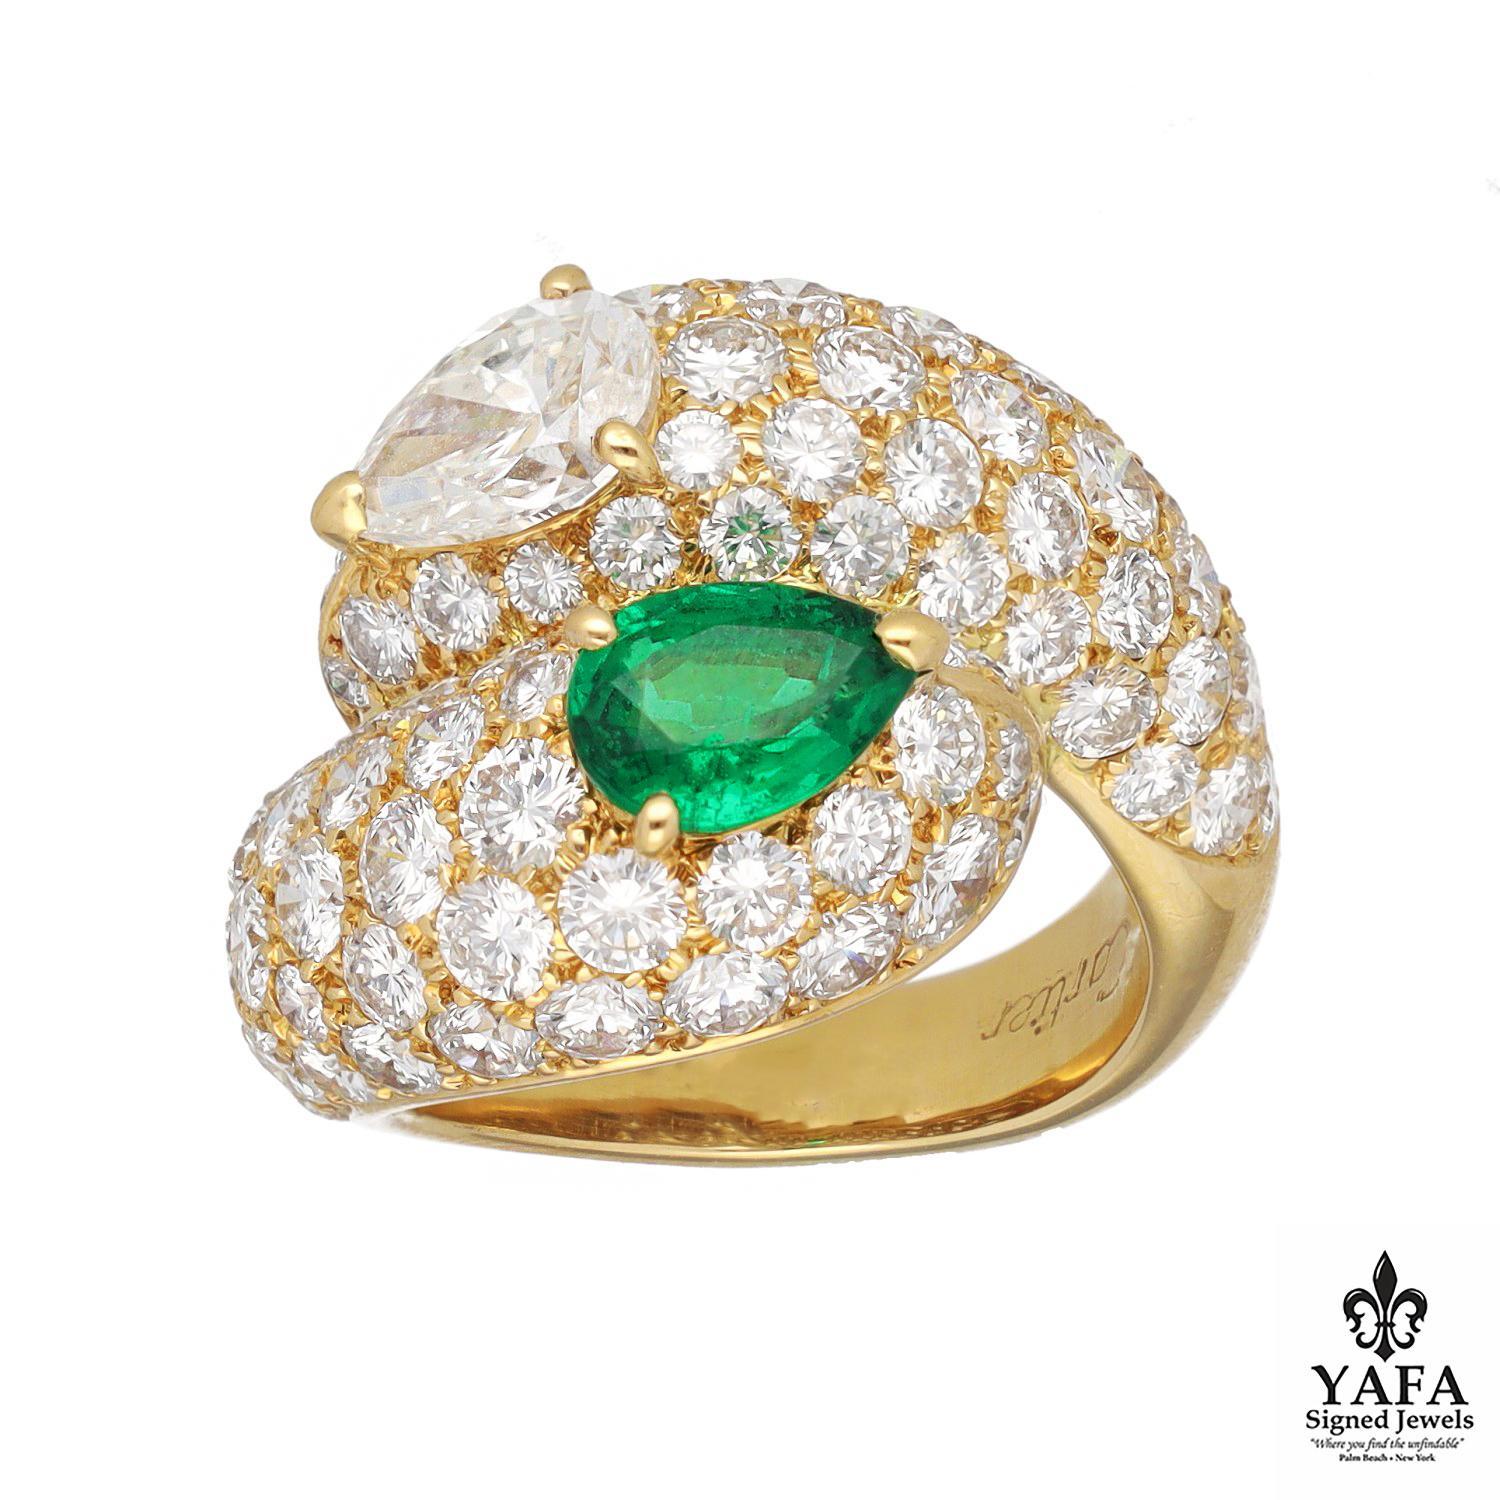 18K Yellow Gold Diamond Pave By-Pass 'You and Me' Ring Containing One Pear-Shaped Diamond and One Pear-Shaped Emerald.
Size - 5
French Assay Marks
Signed - Cartier